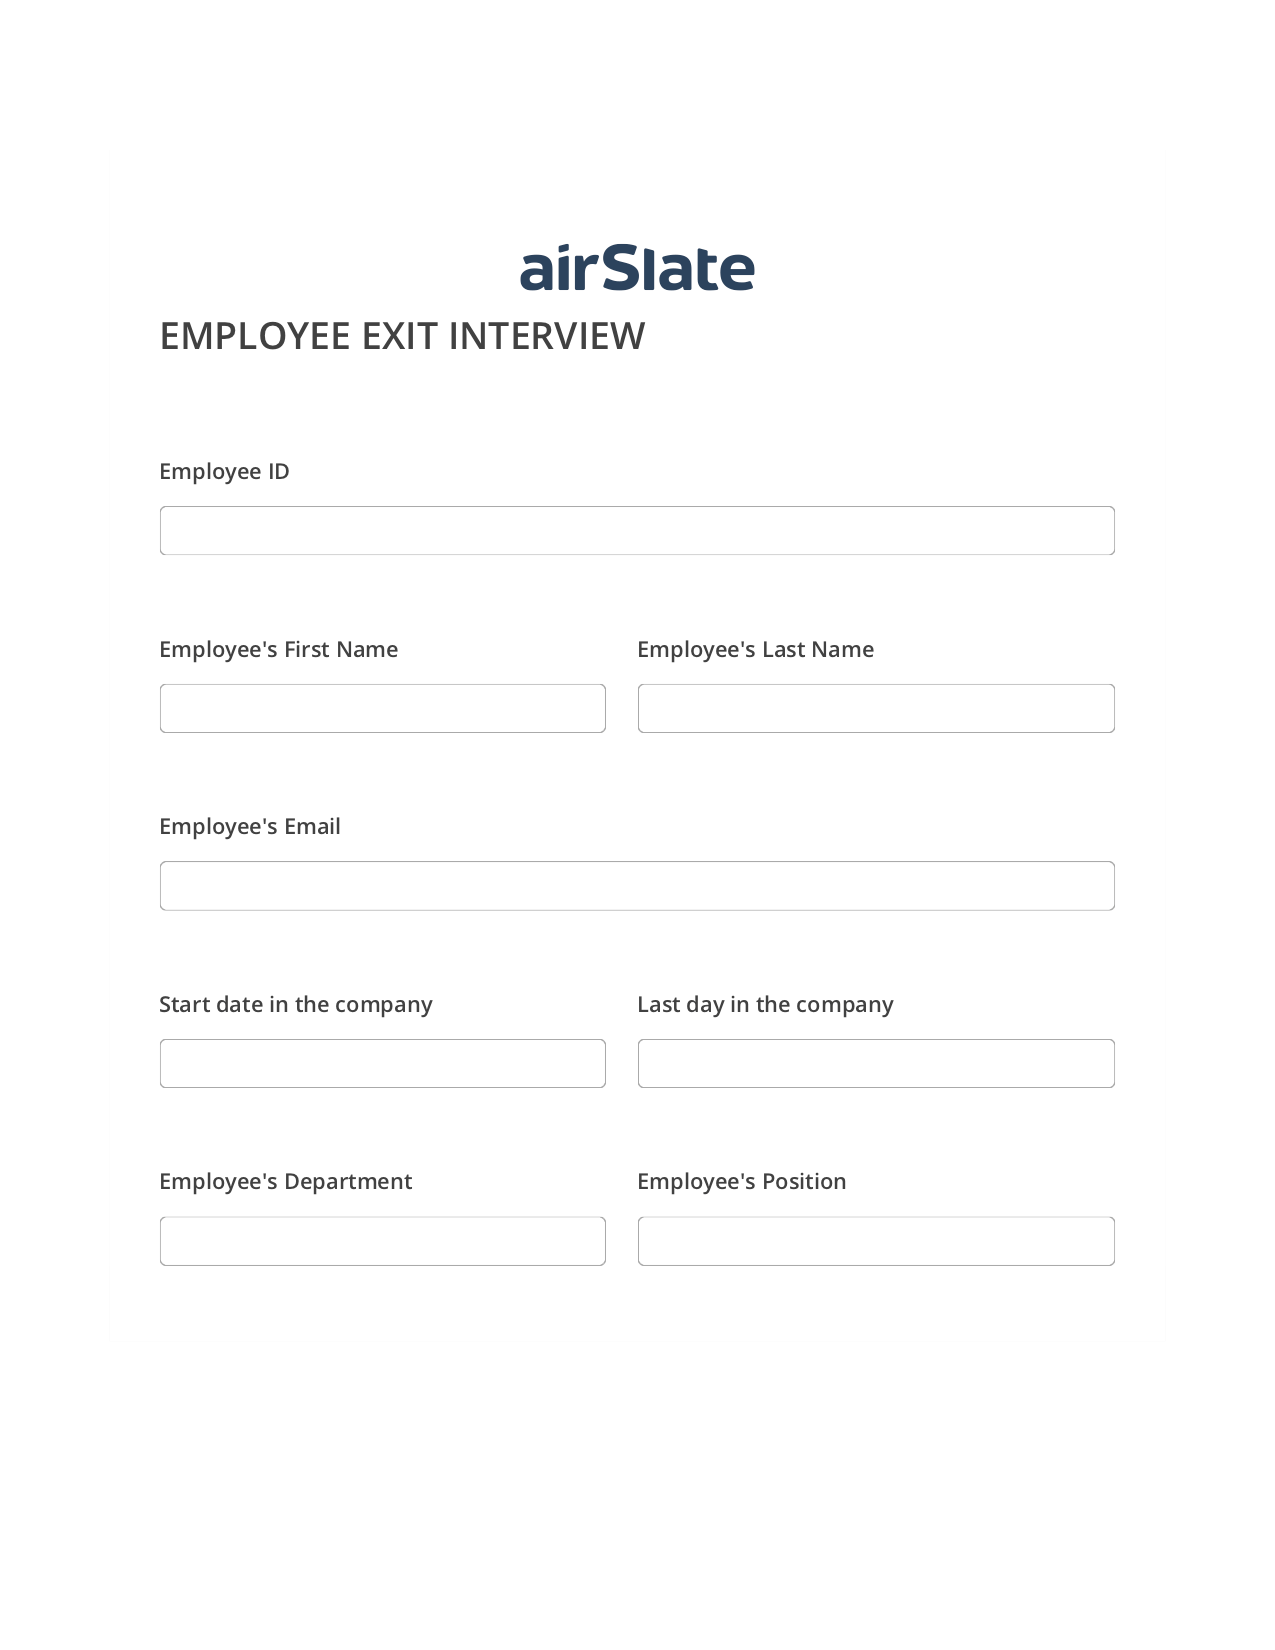 Employee Exit Interview Flow Pre-fill from Google Sheets Bot